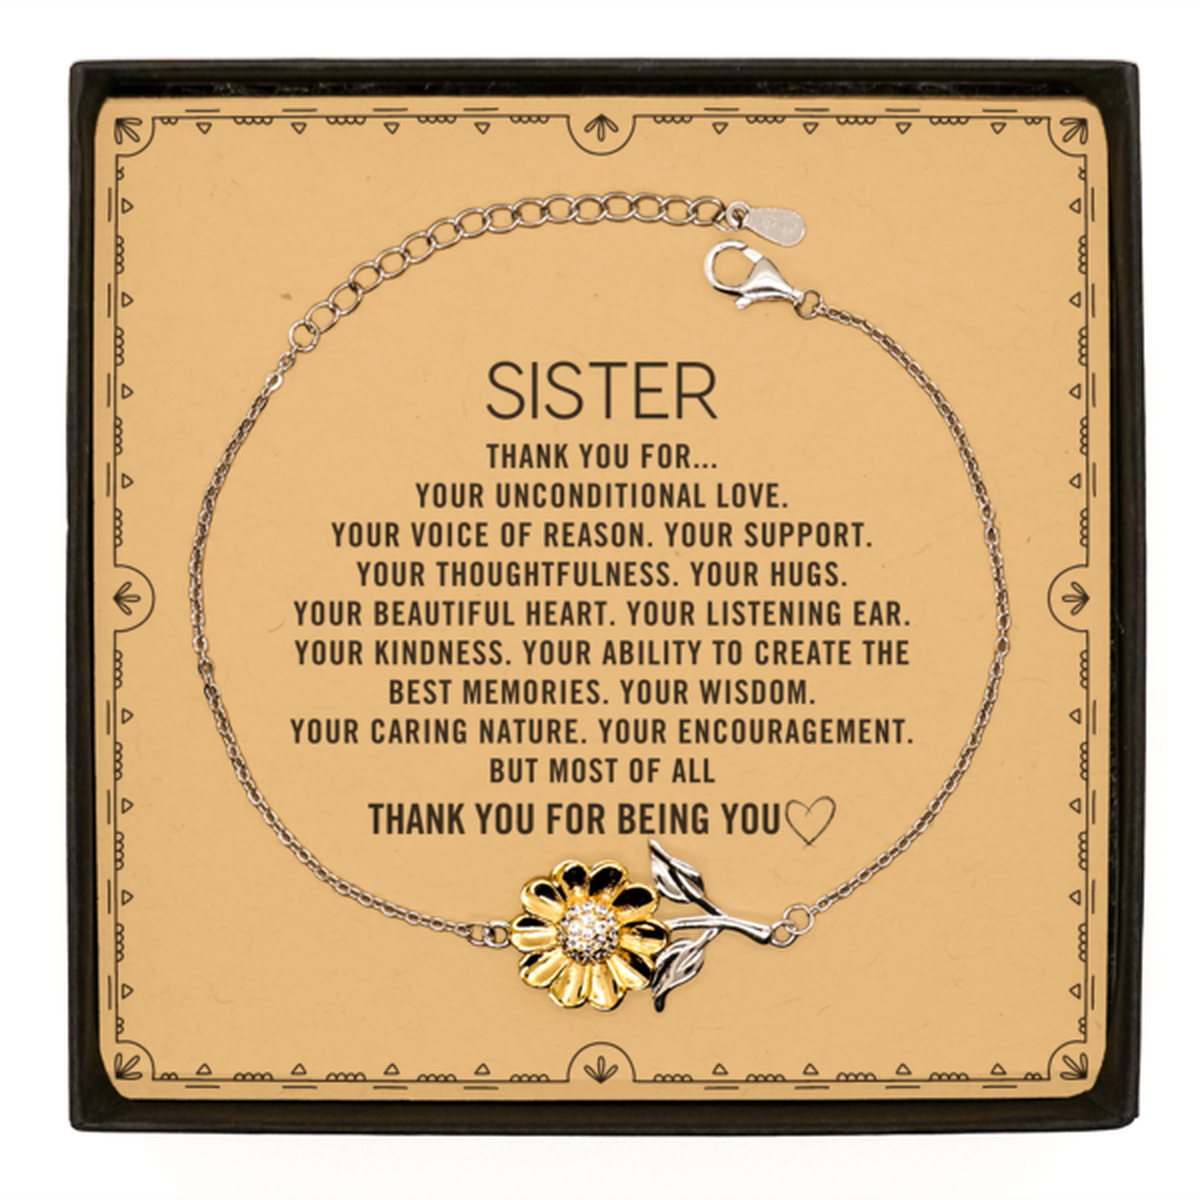 Sister Sunflower Bracelet Custom, Message Card Gifts For Sister Christmas Graduation Birthday Gifts for Men Women Sister Thank you for Your unconditional love